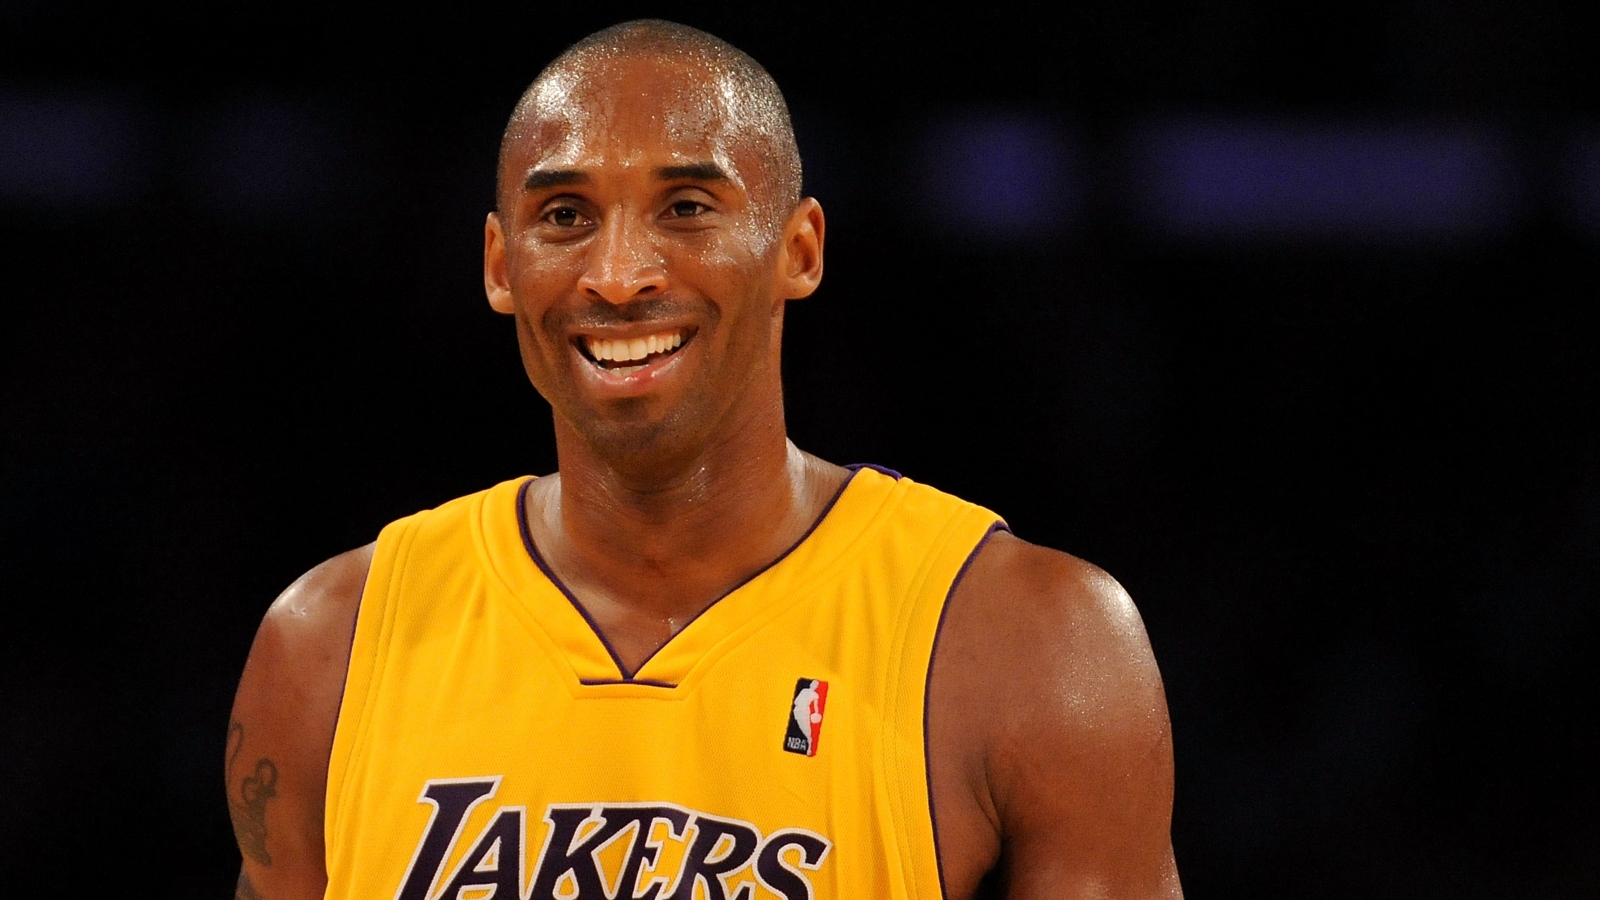 Kobe, Gigi Bryant to be honored by Lakers before playoff game